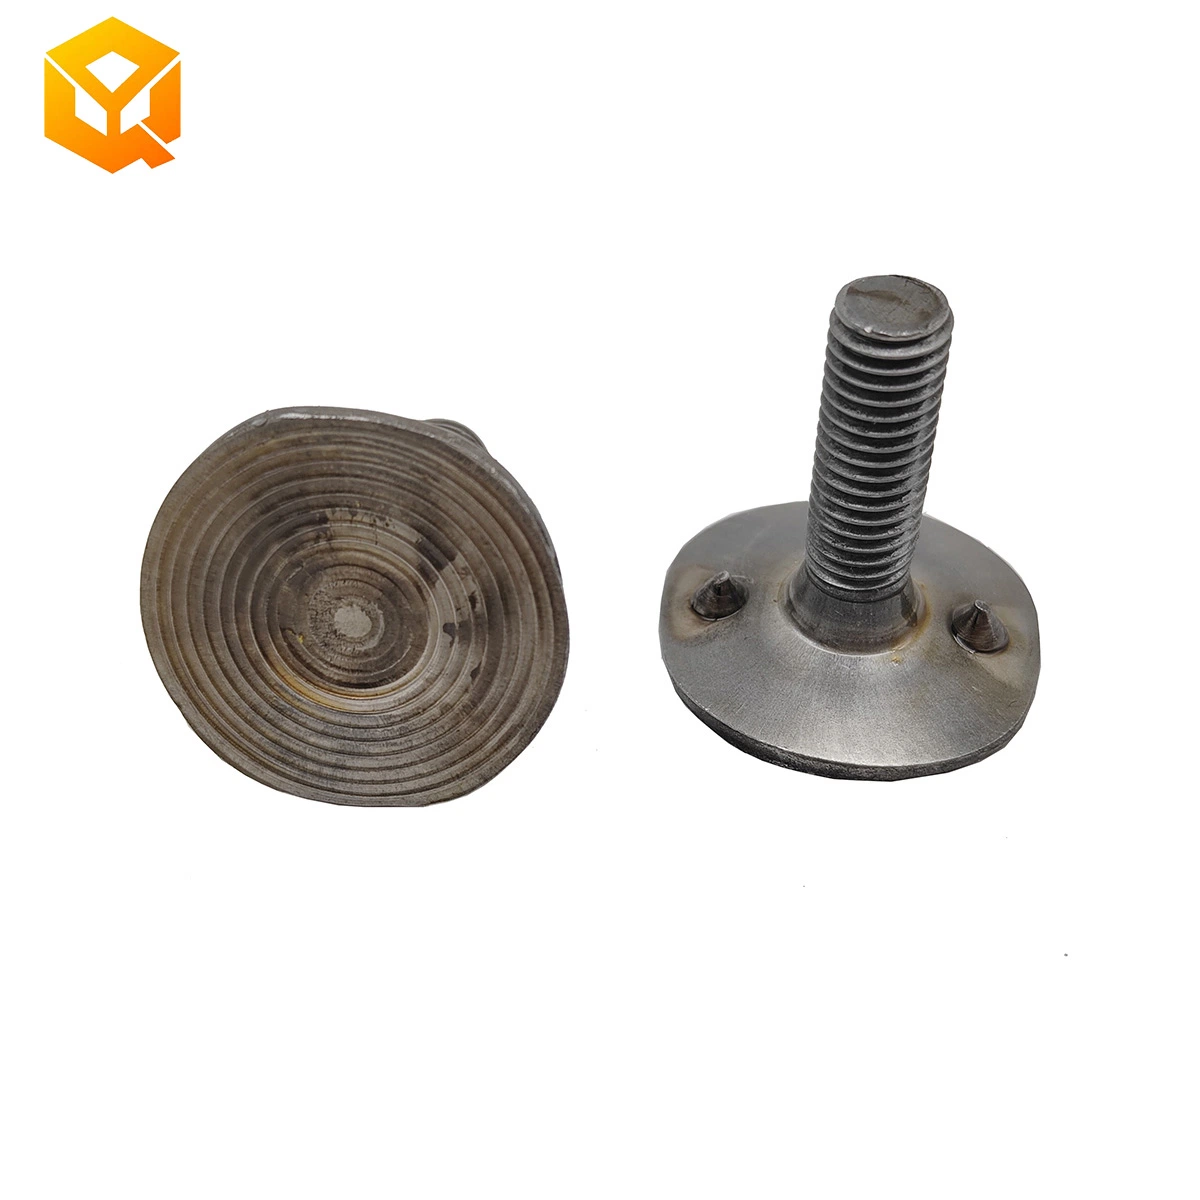 Square Neck Round Head Elevator Bolt for Hinges, Brackets - Fasteners